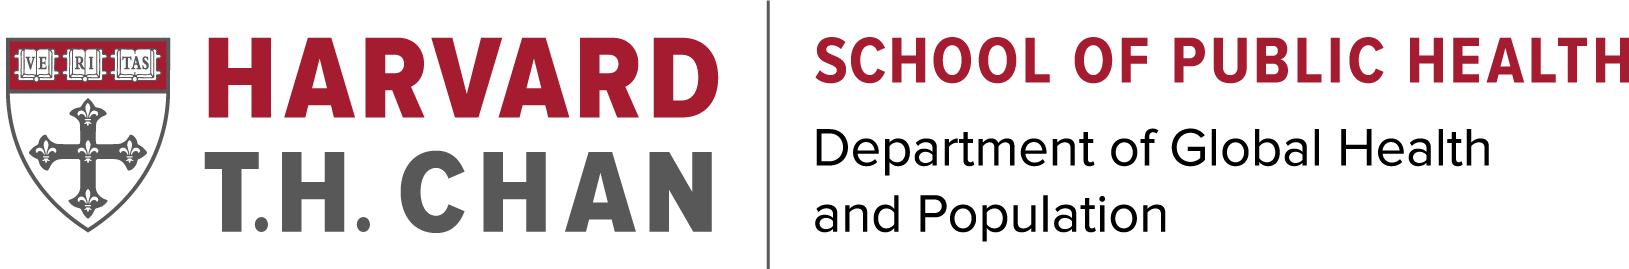 Harvard T.H. Chan School of Public Health Department of Global Health and Population